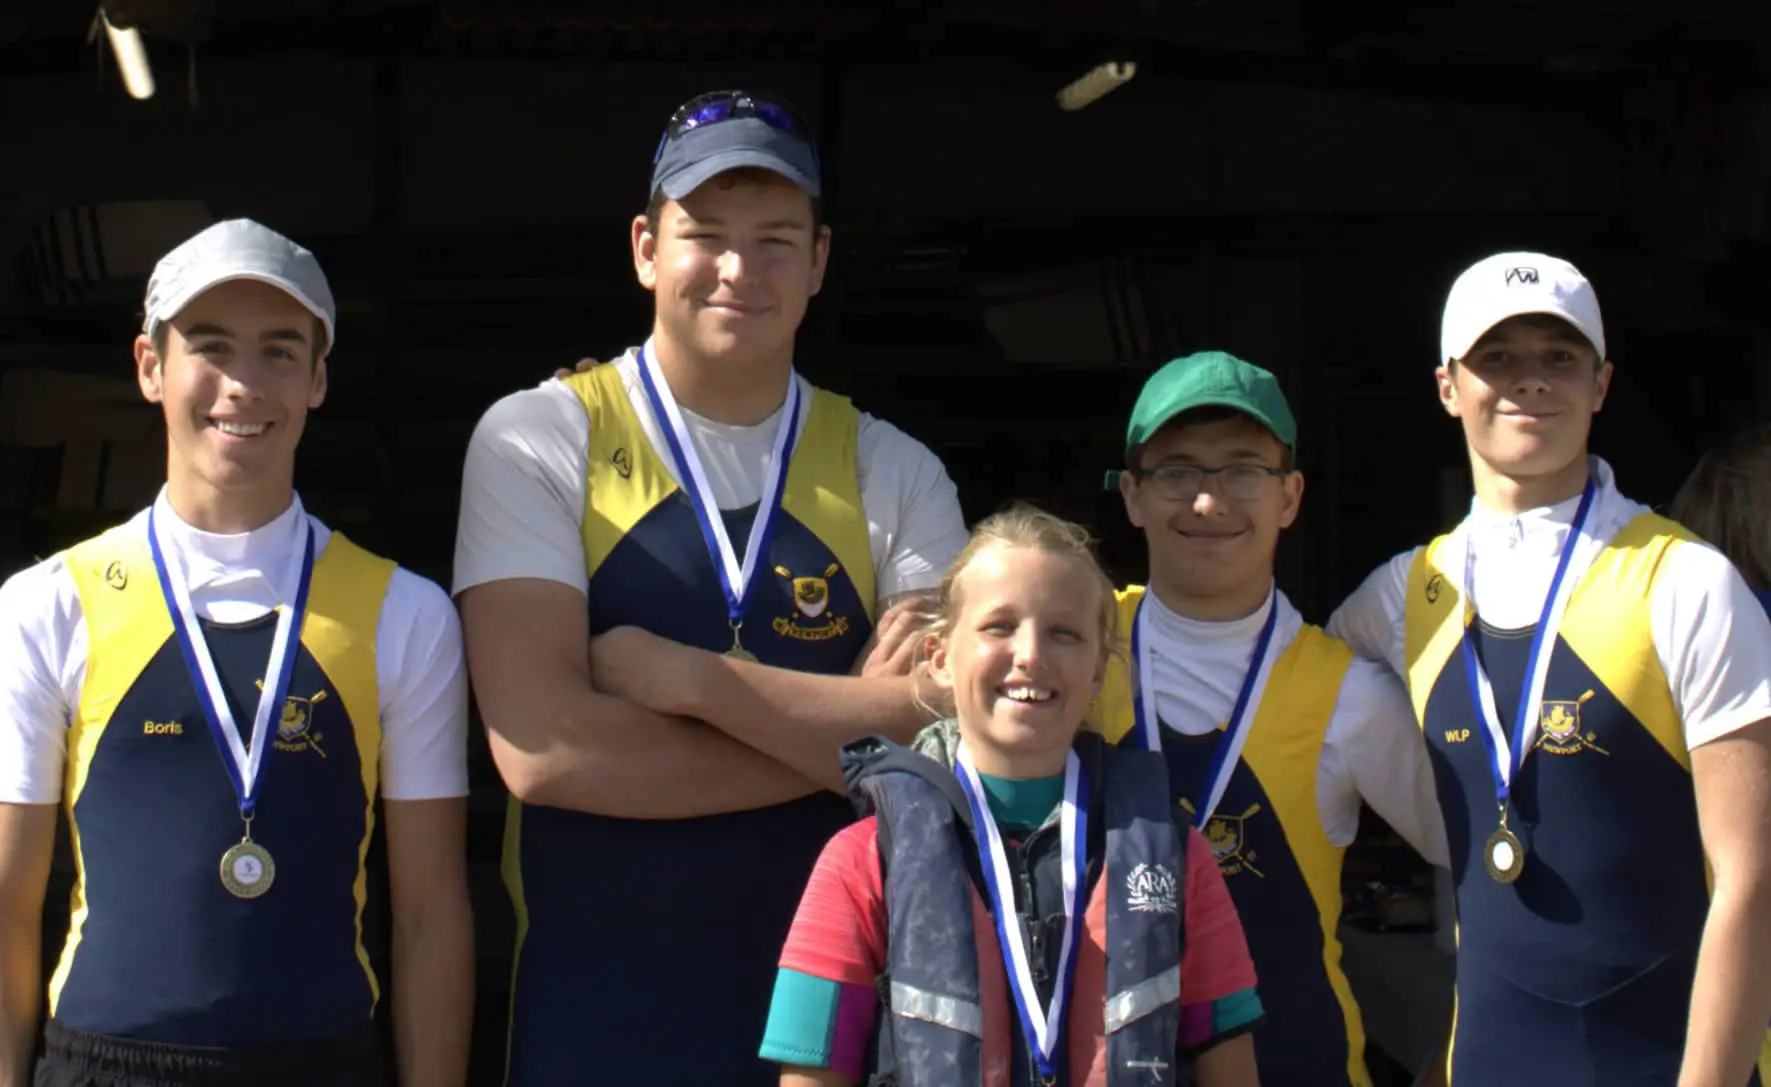 The U16 quad of William Loveday-Powell, Connor Garner, Boris Hare, and Hayden Tiffin, coxed by Marianna Hare